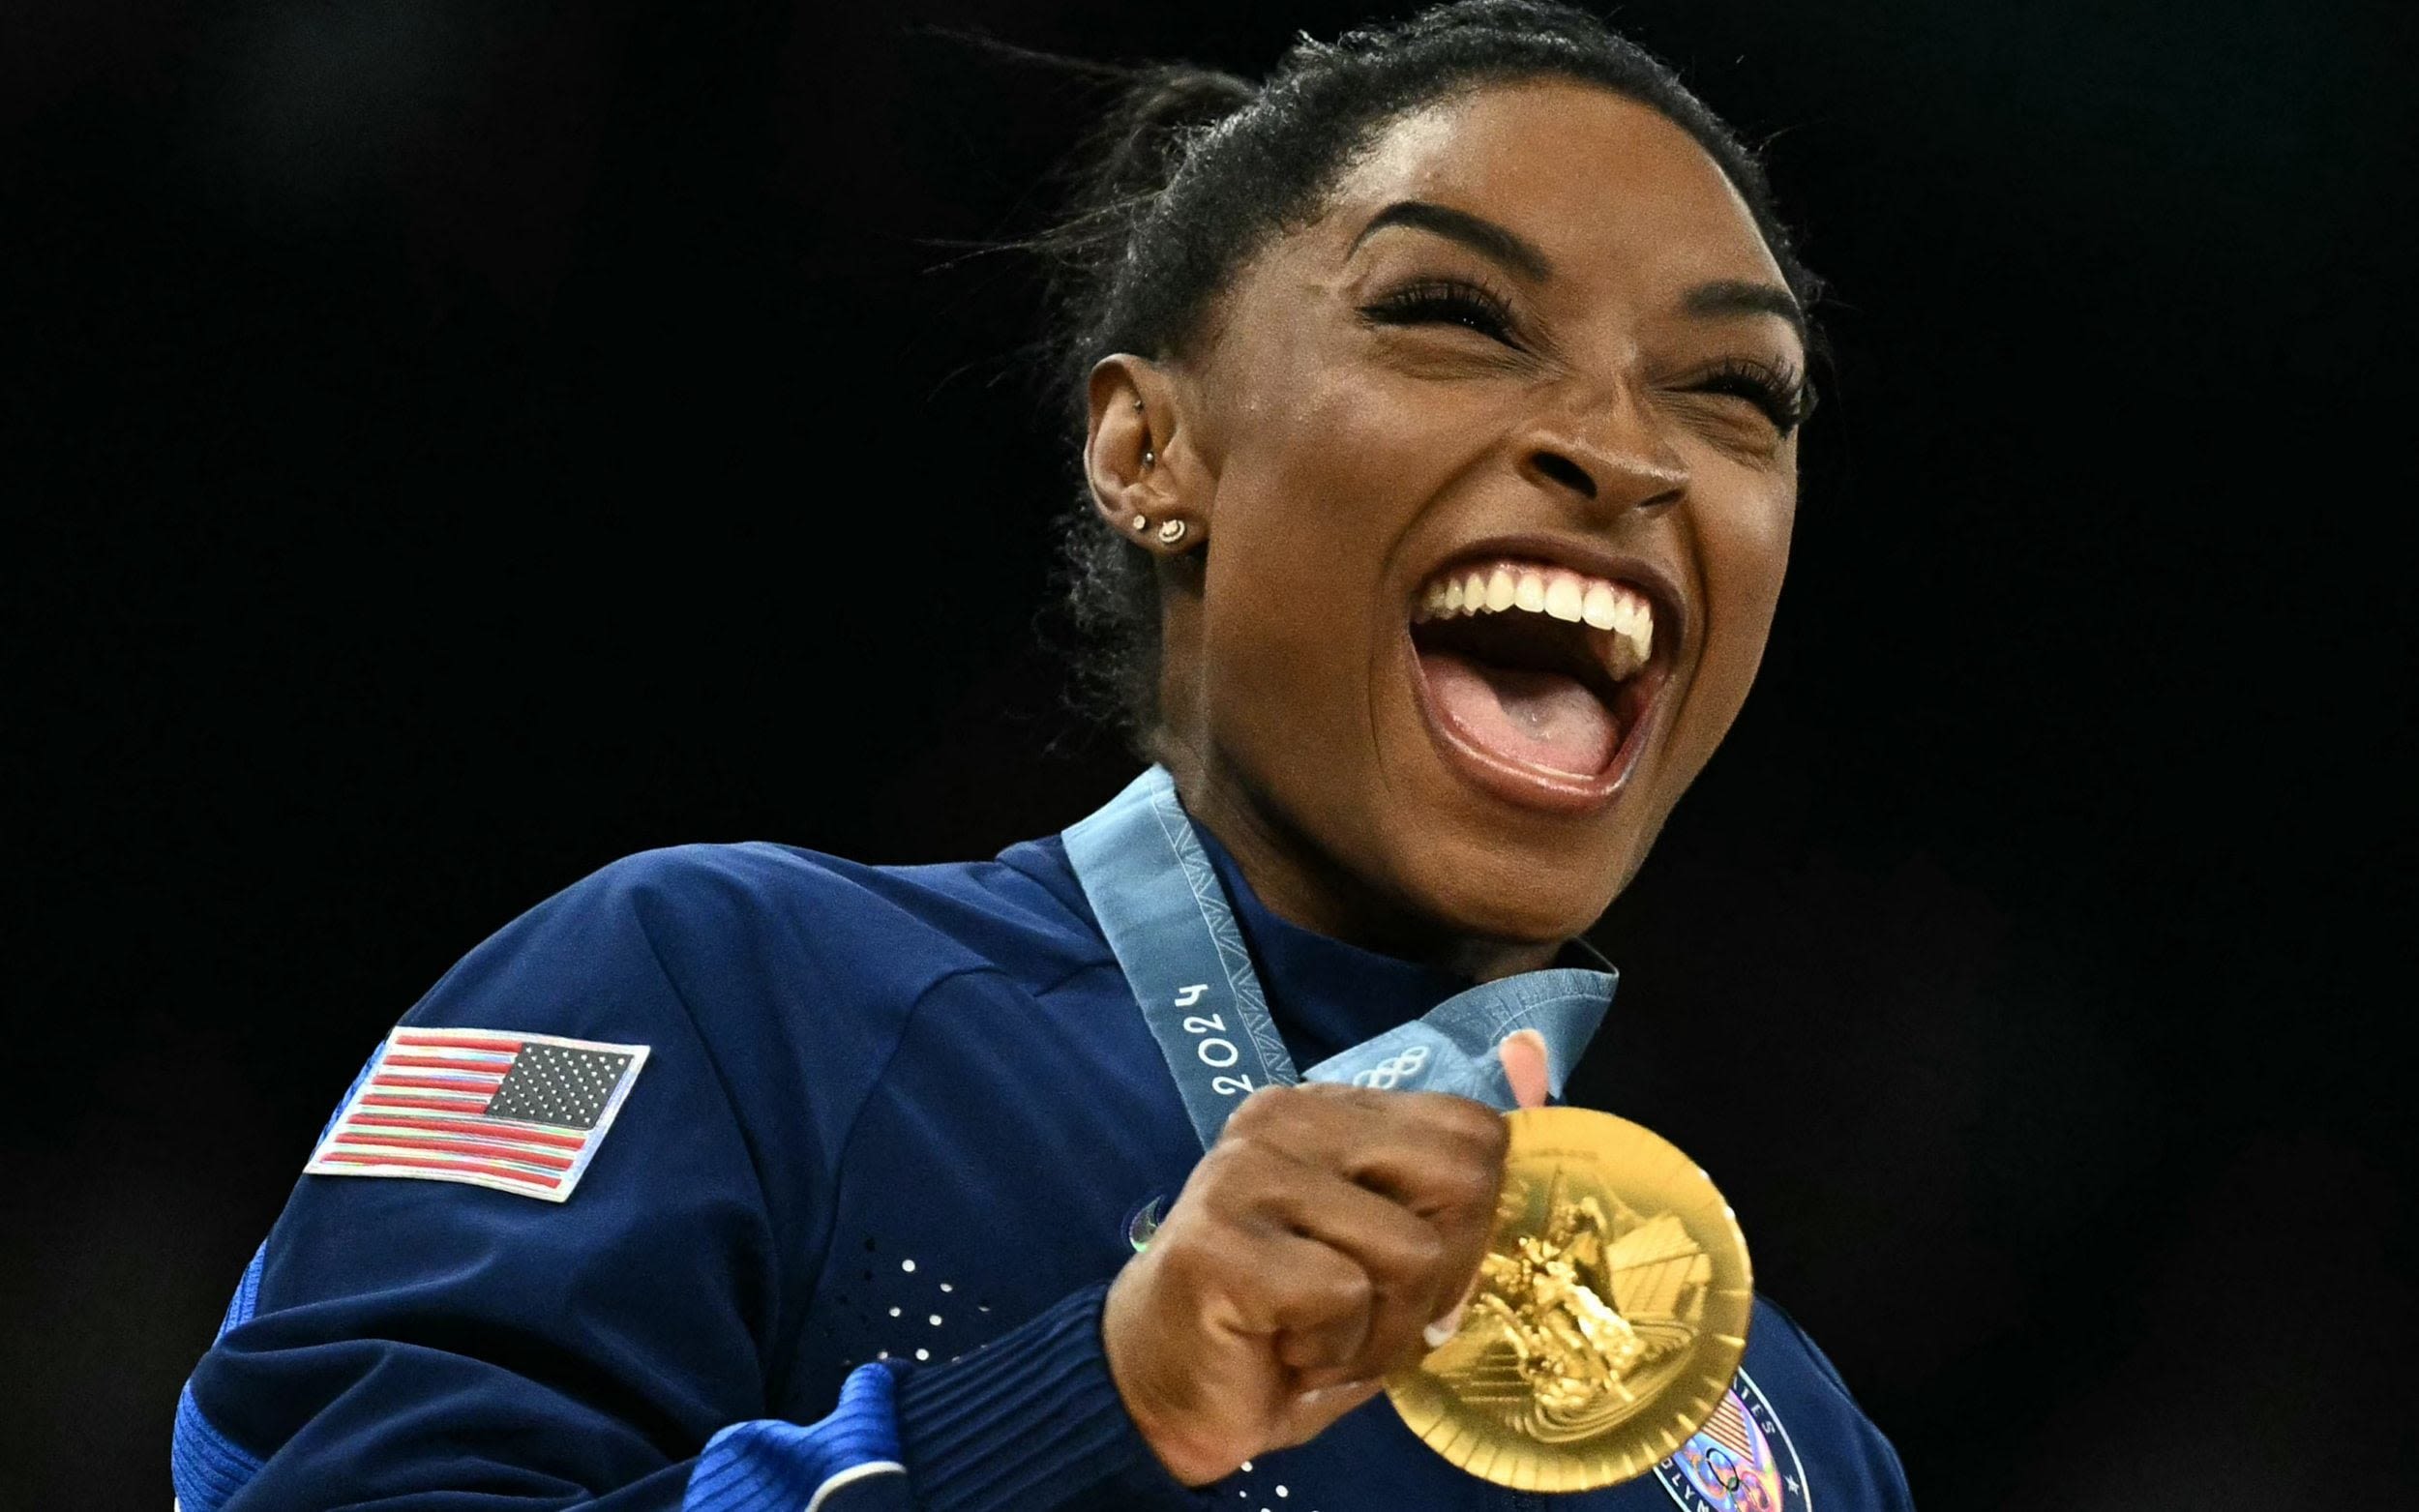 Agony for Team GB as Simone Biles and USA land gold in team final